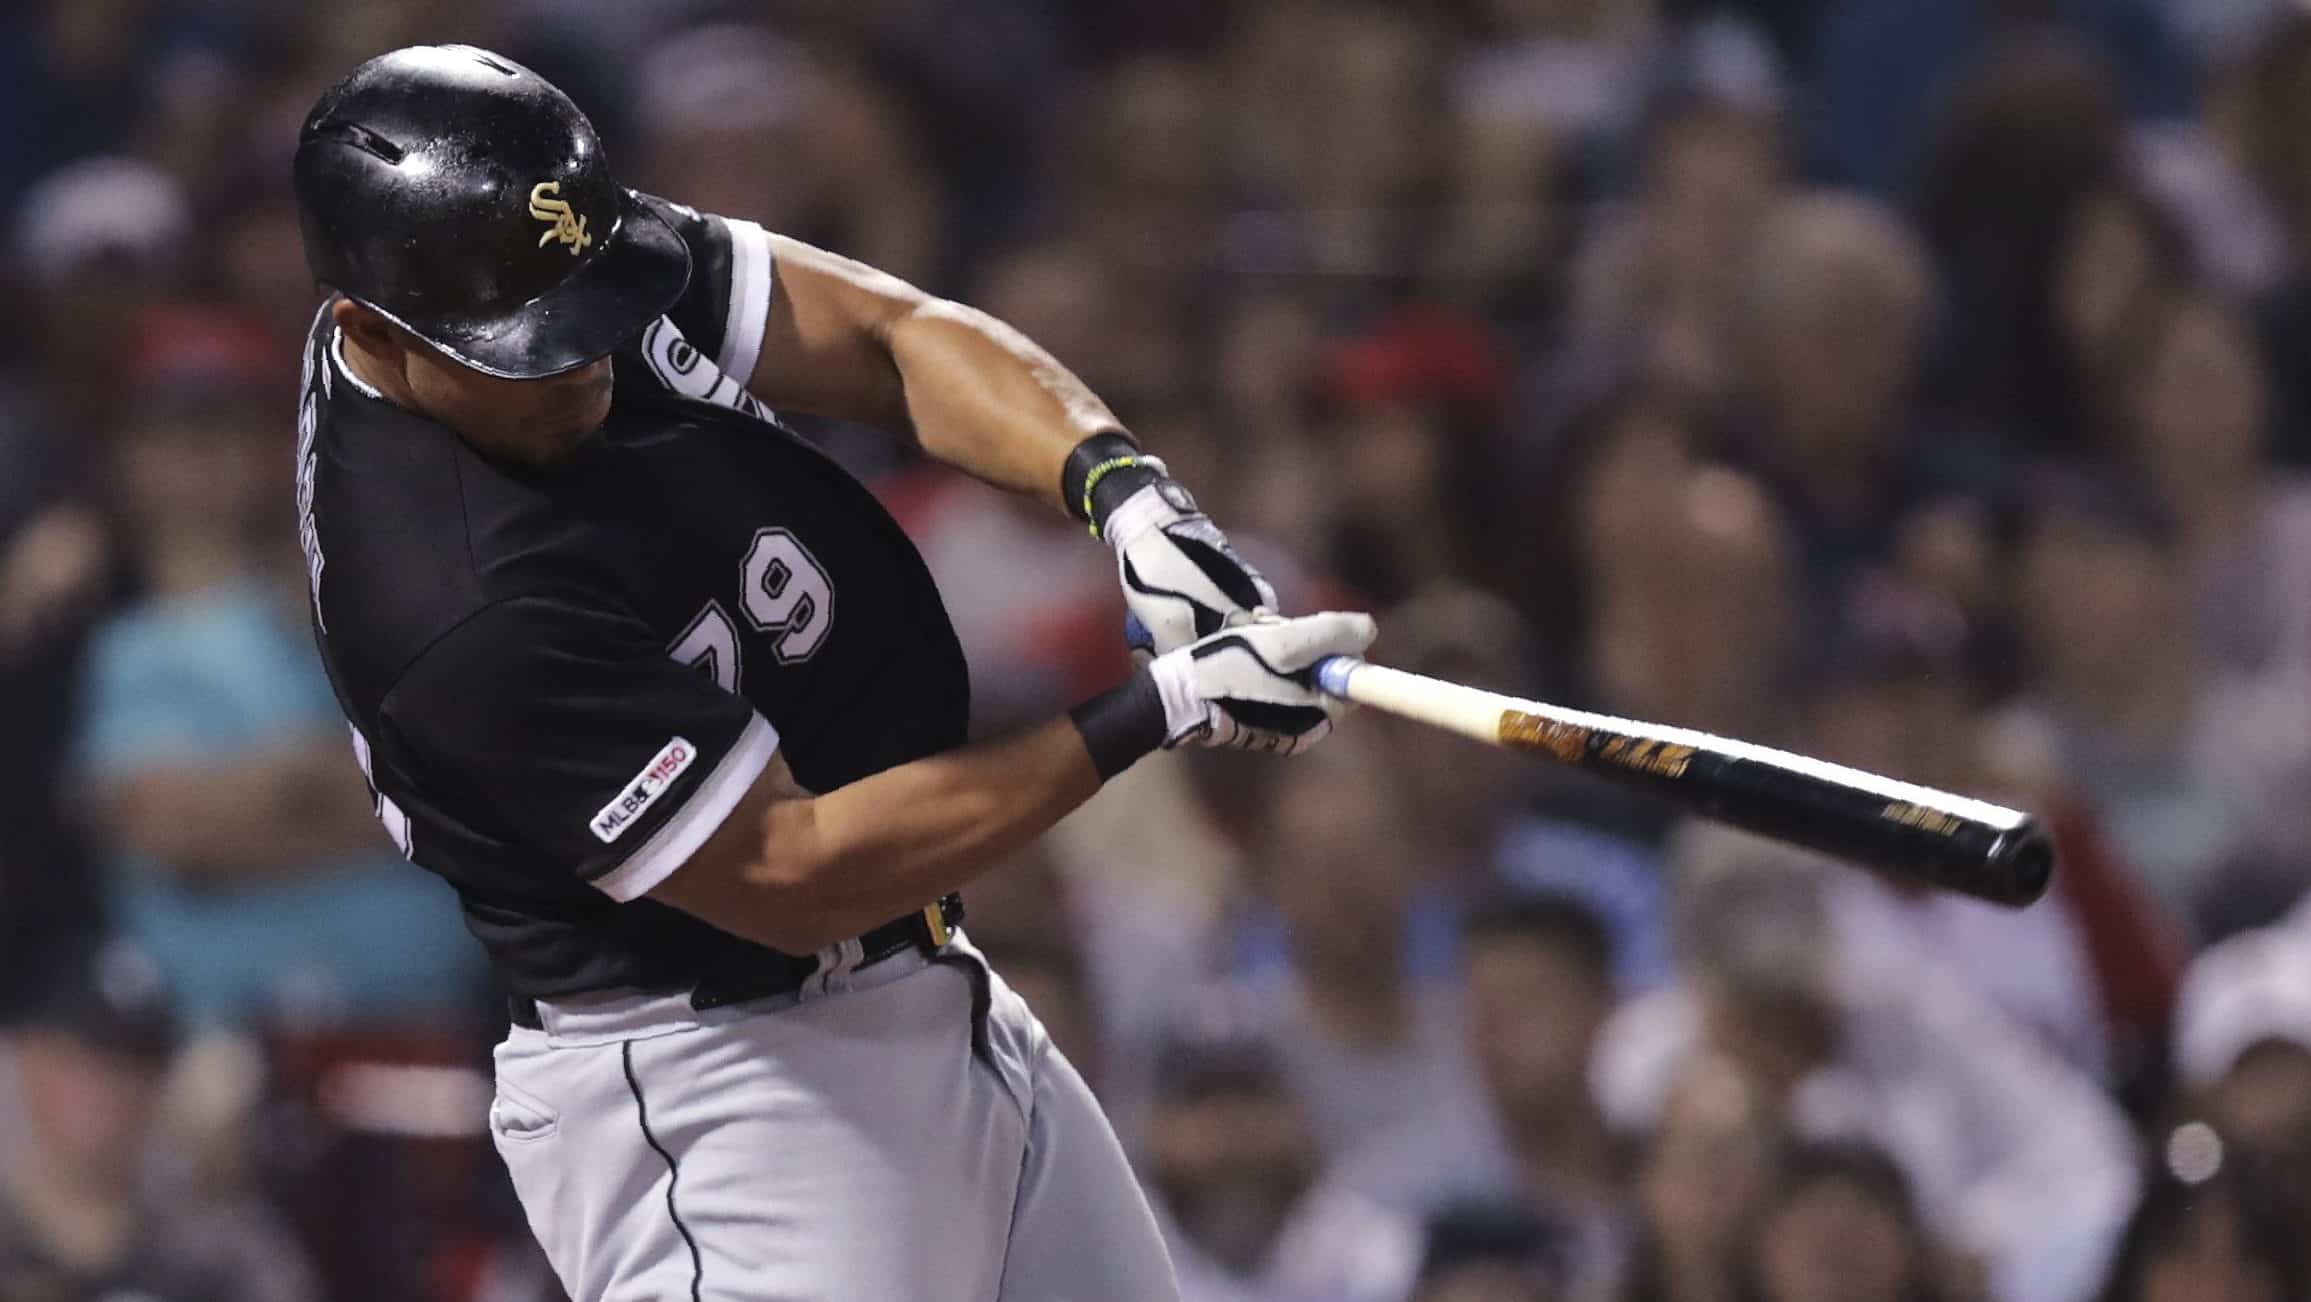 Both traditional and advanced stats agree Jose Abreu is worth keeping